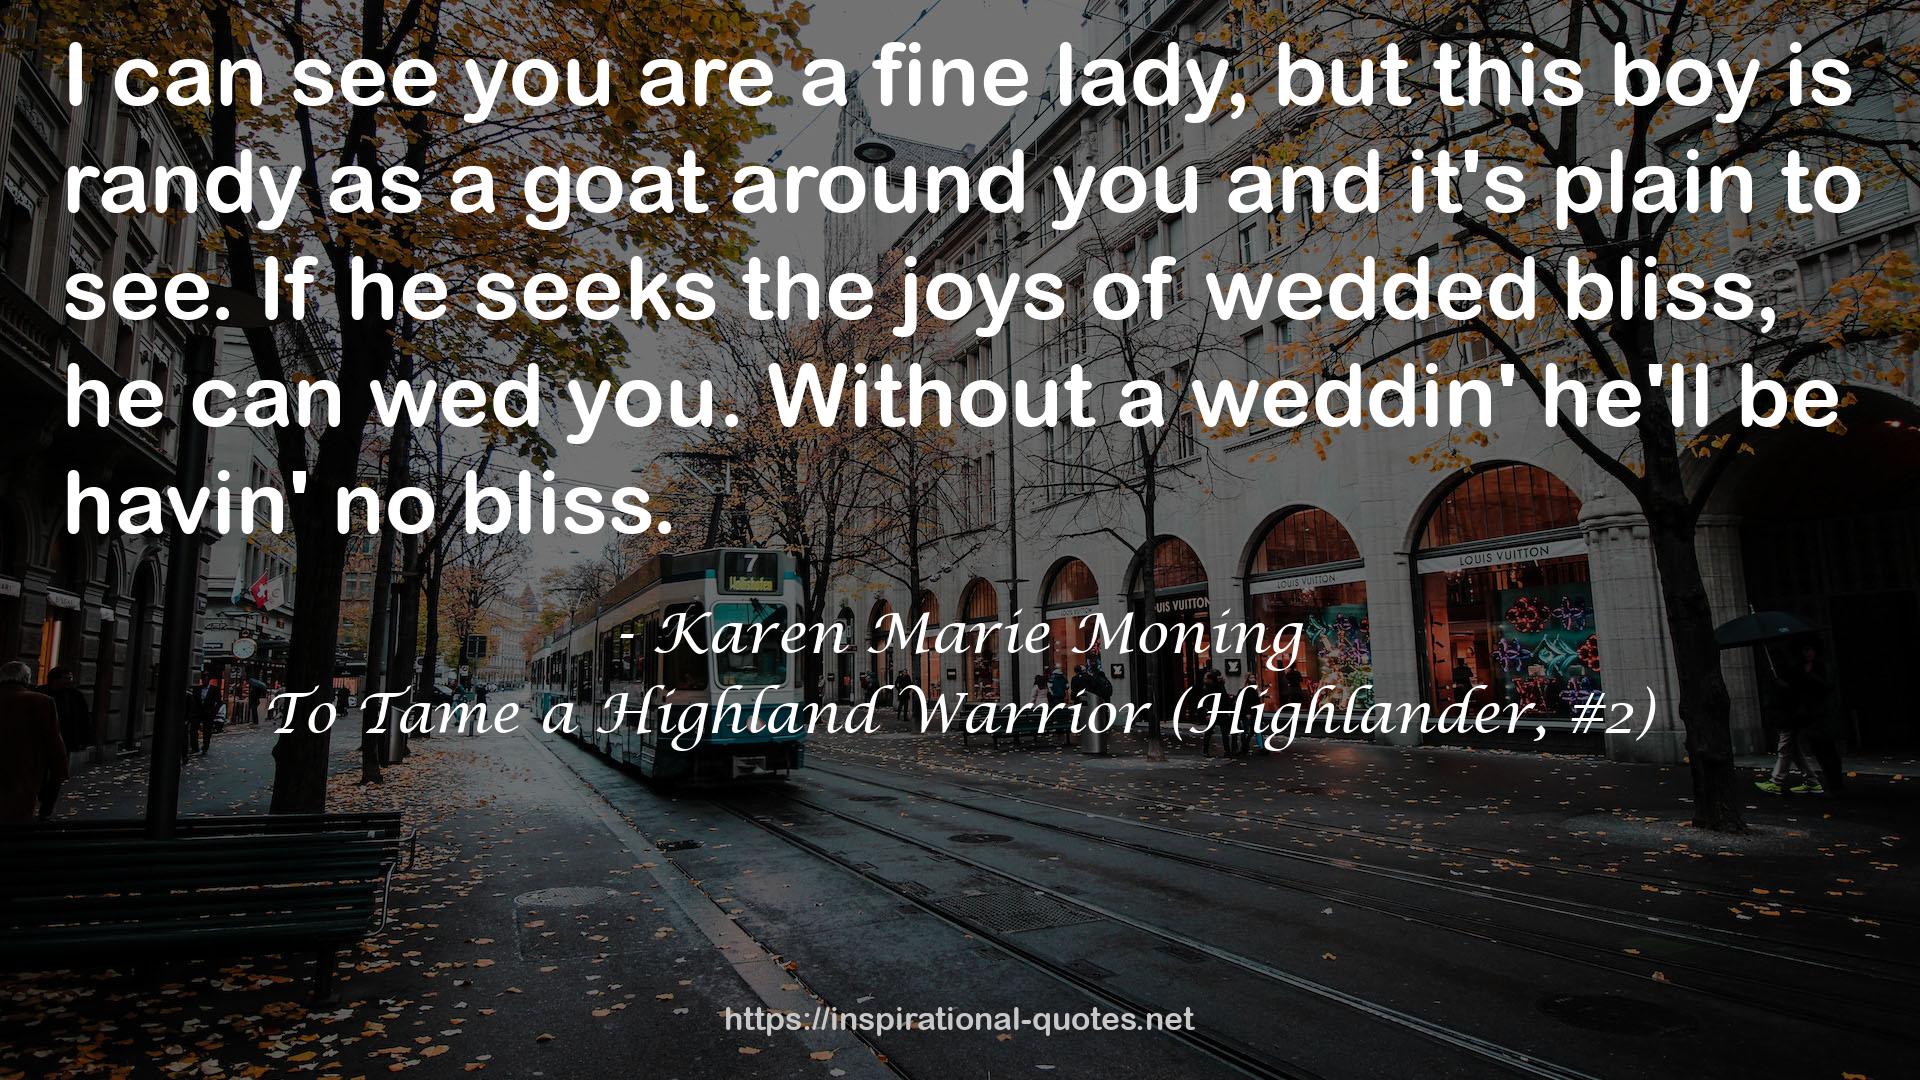 To Tame a Highland Warrior (Highlander, #2) QUOTES